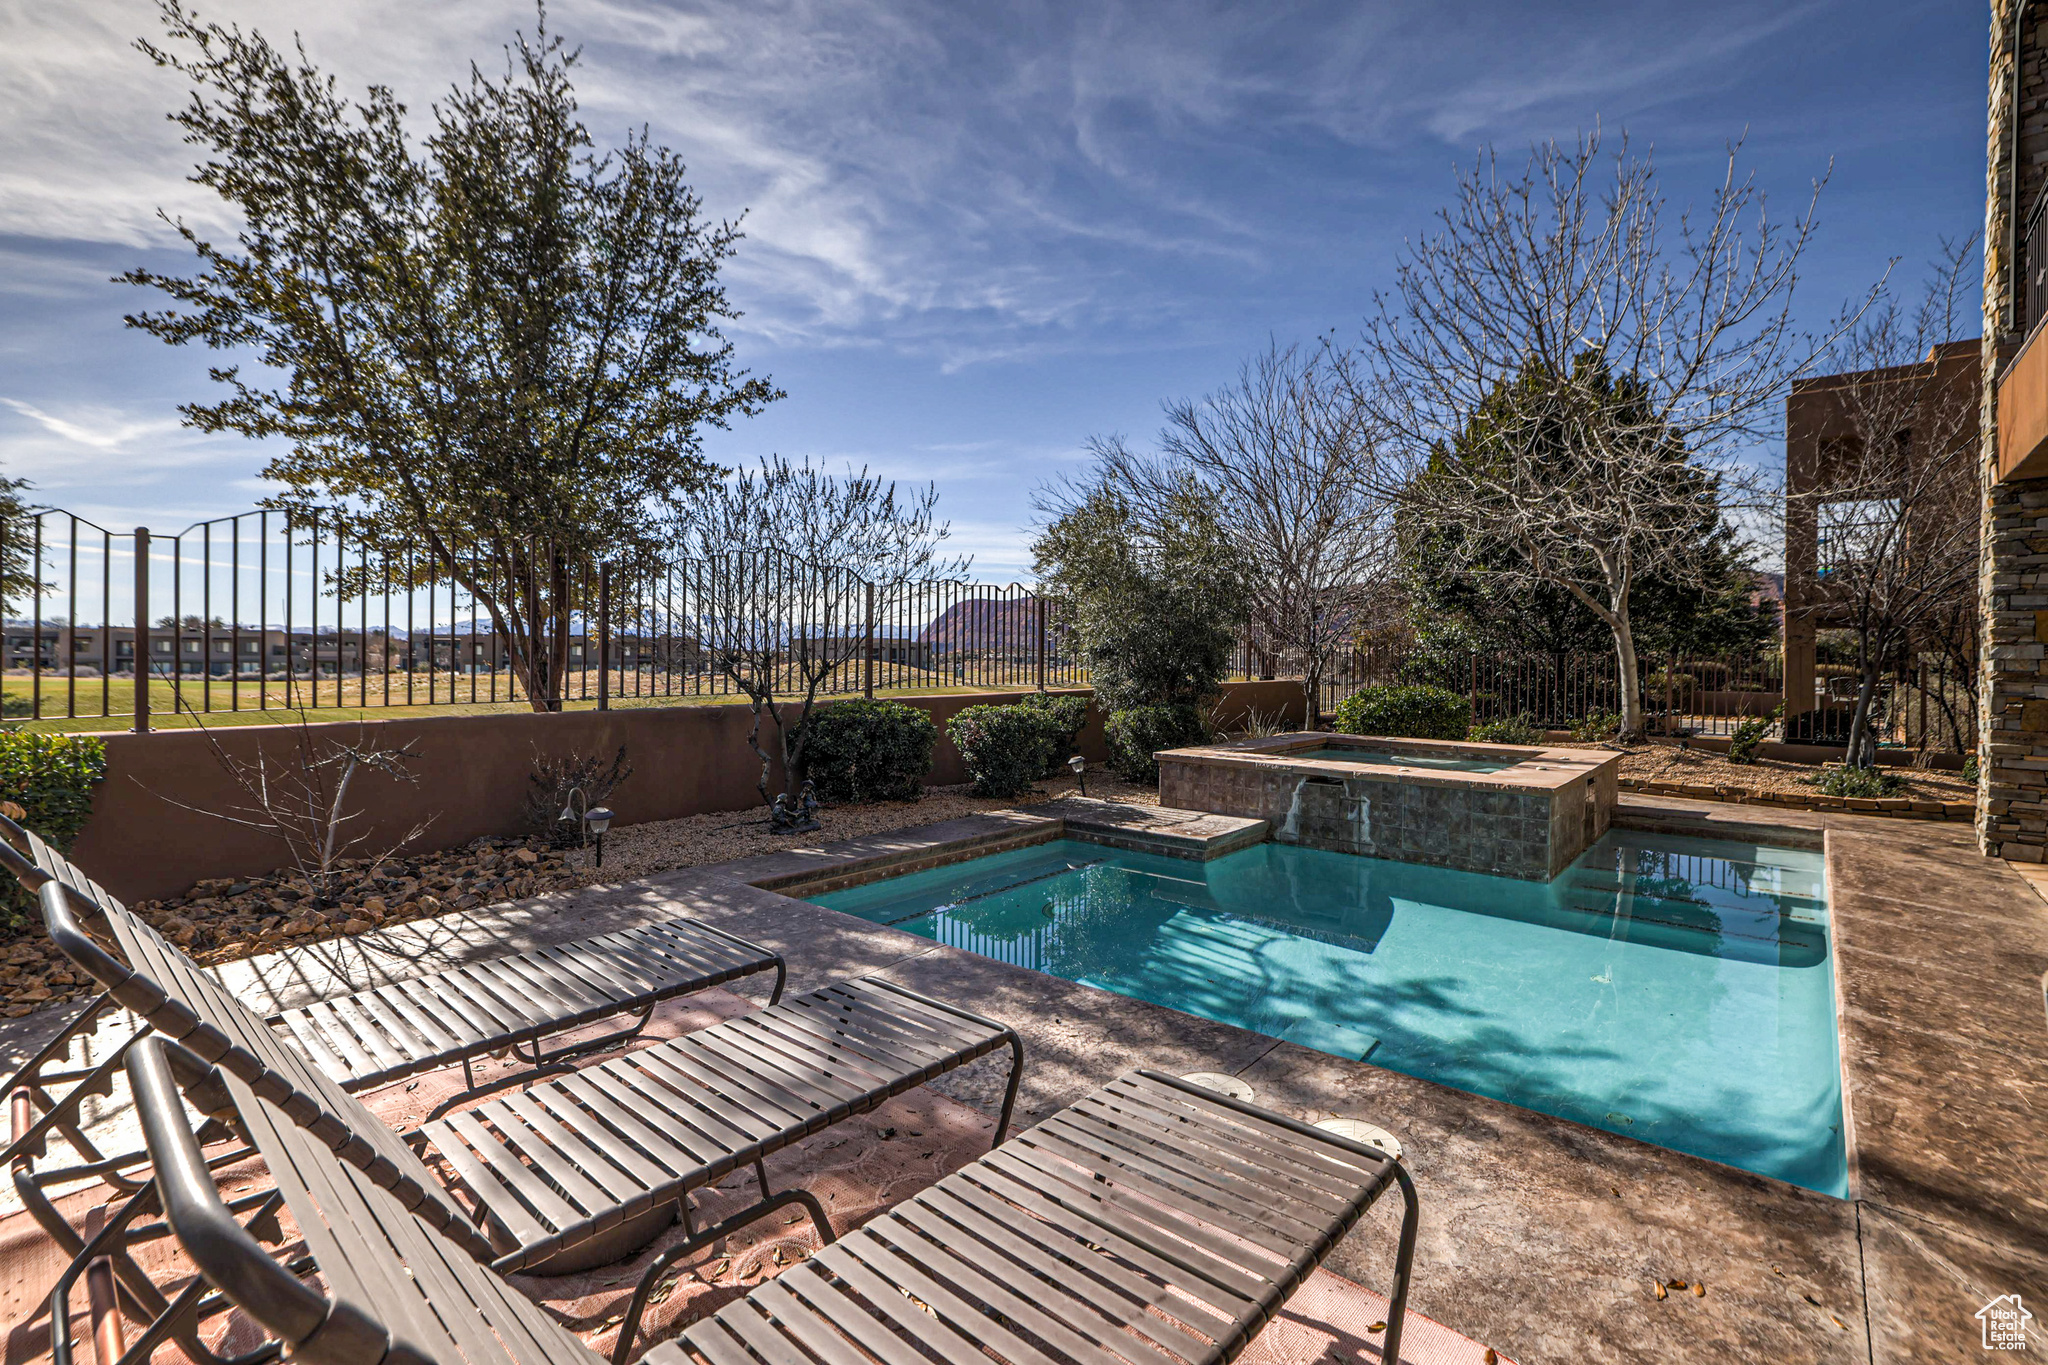 View of swimming pool with an in ground hot tub and a patio